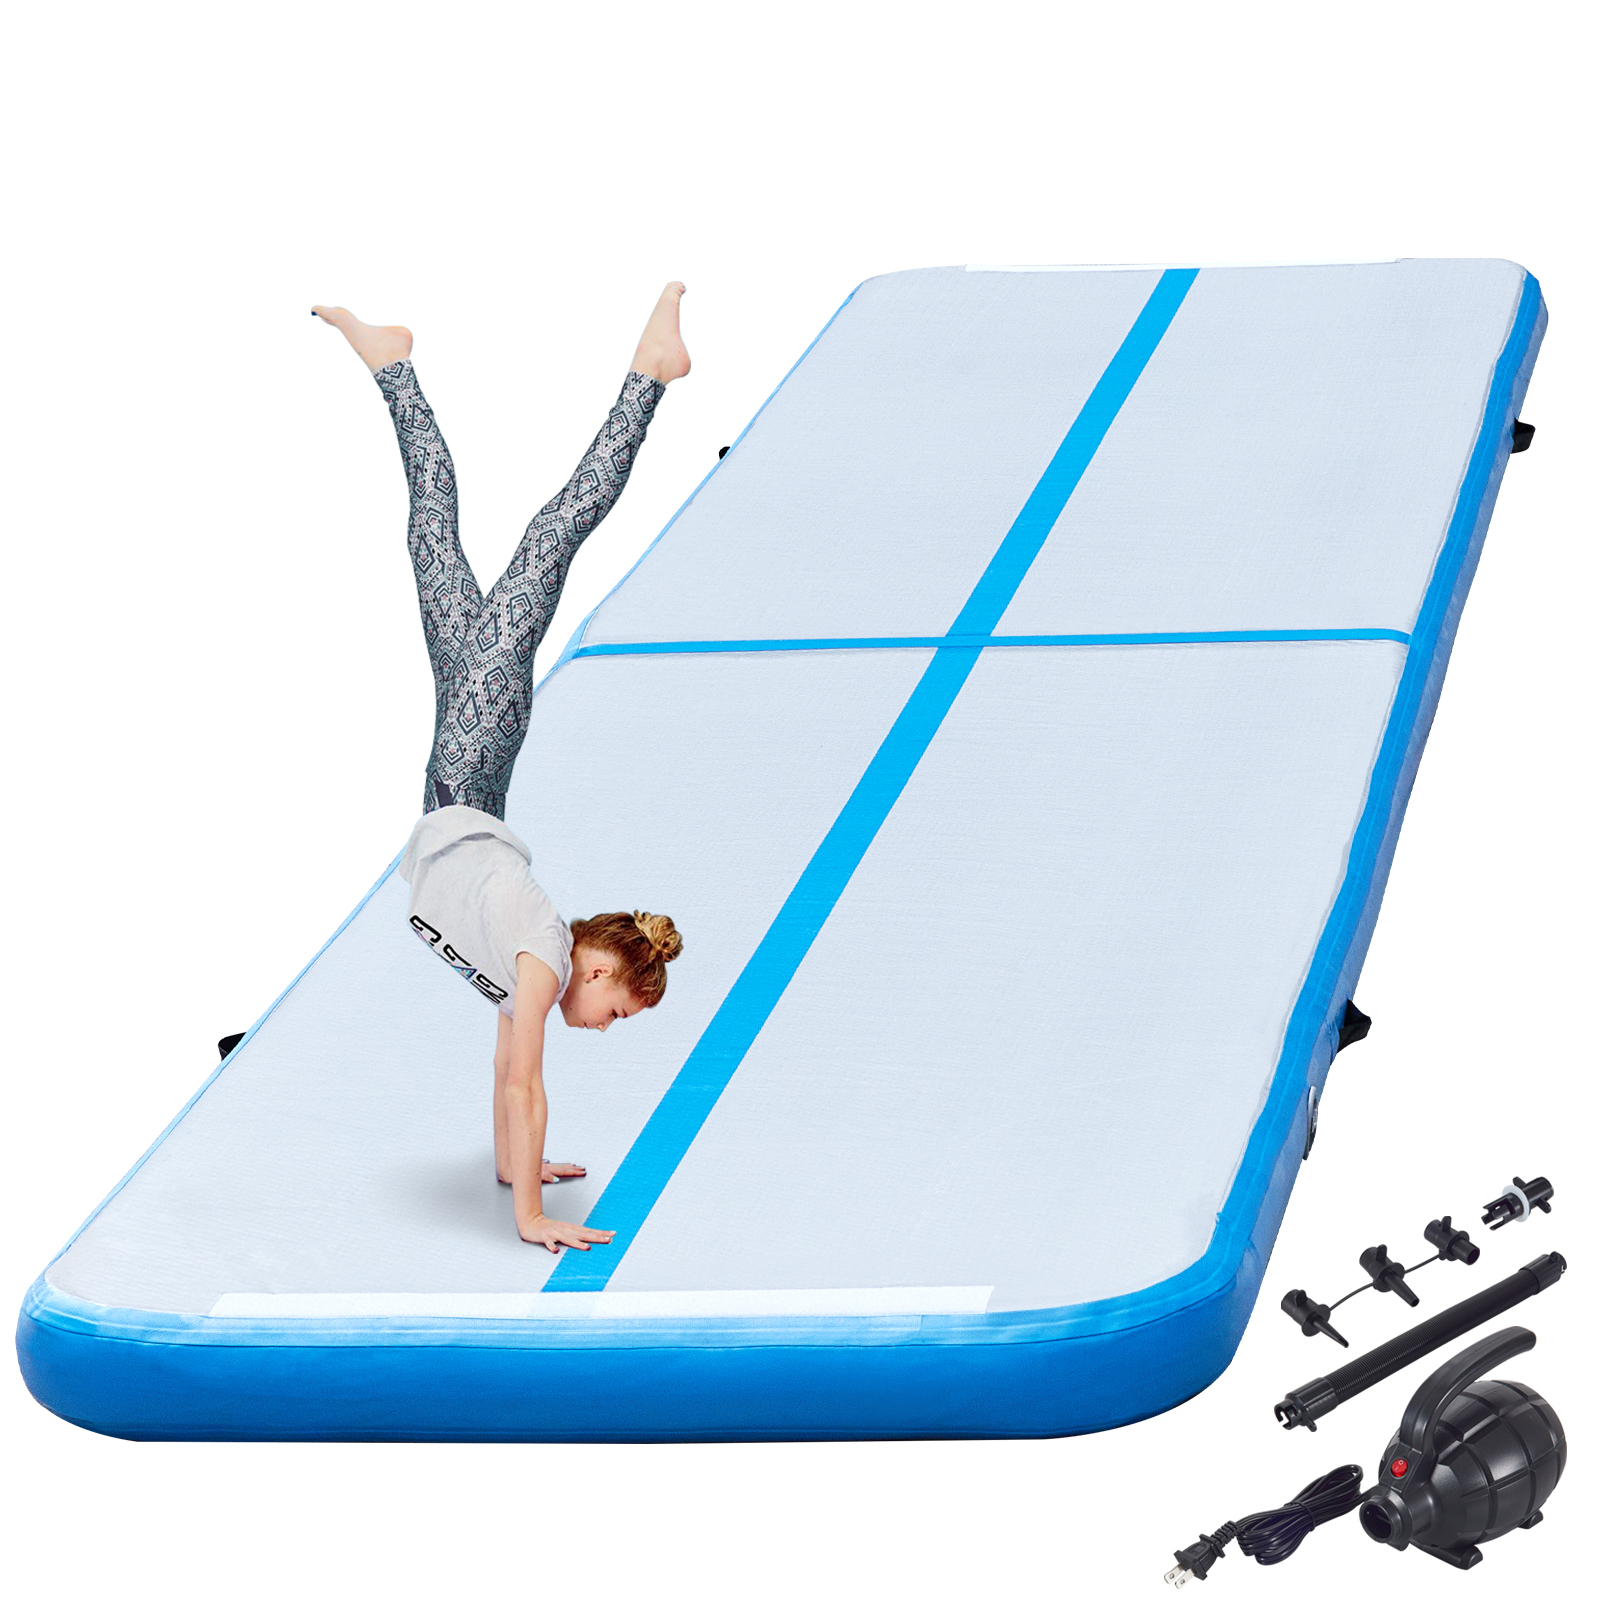 AKSPORT Air Track 10ft 13ft 16ft 20ft Airtrack Gymnastics Tumbling Mat Inflatable Tumble Track with Electric Air Pump for Home Use/Tumble/Gym/Training/Cheerleading 